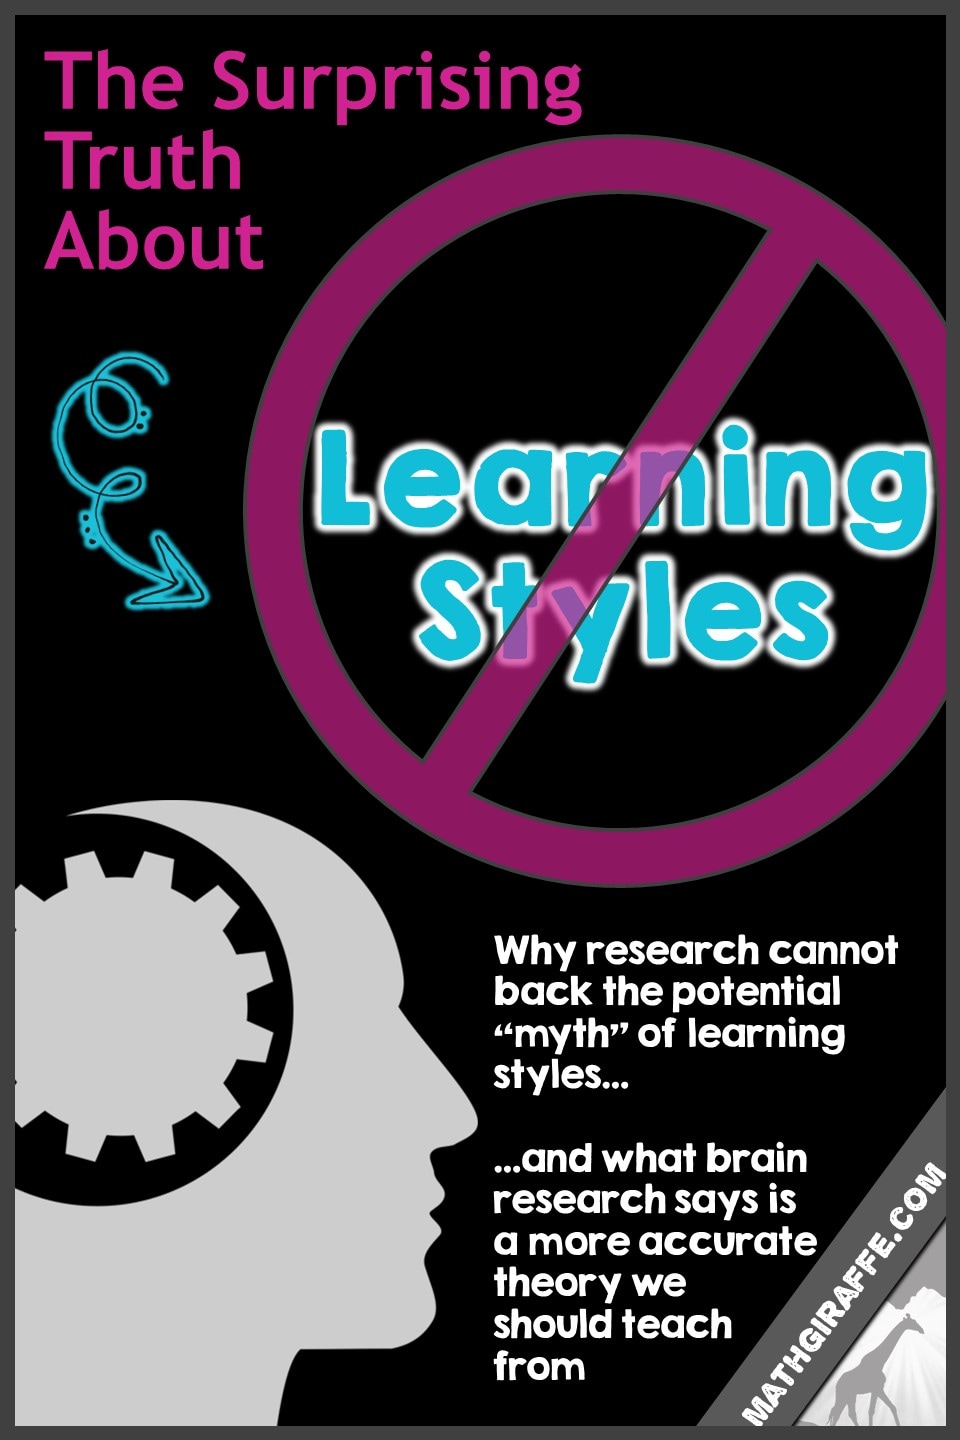 The Learning Styles Philosophy vs. the More Accurate Dual Coding Theory